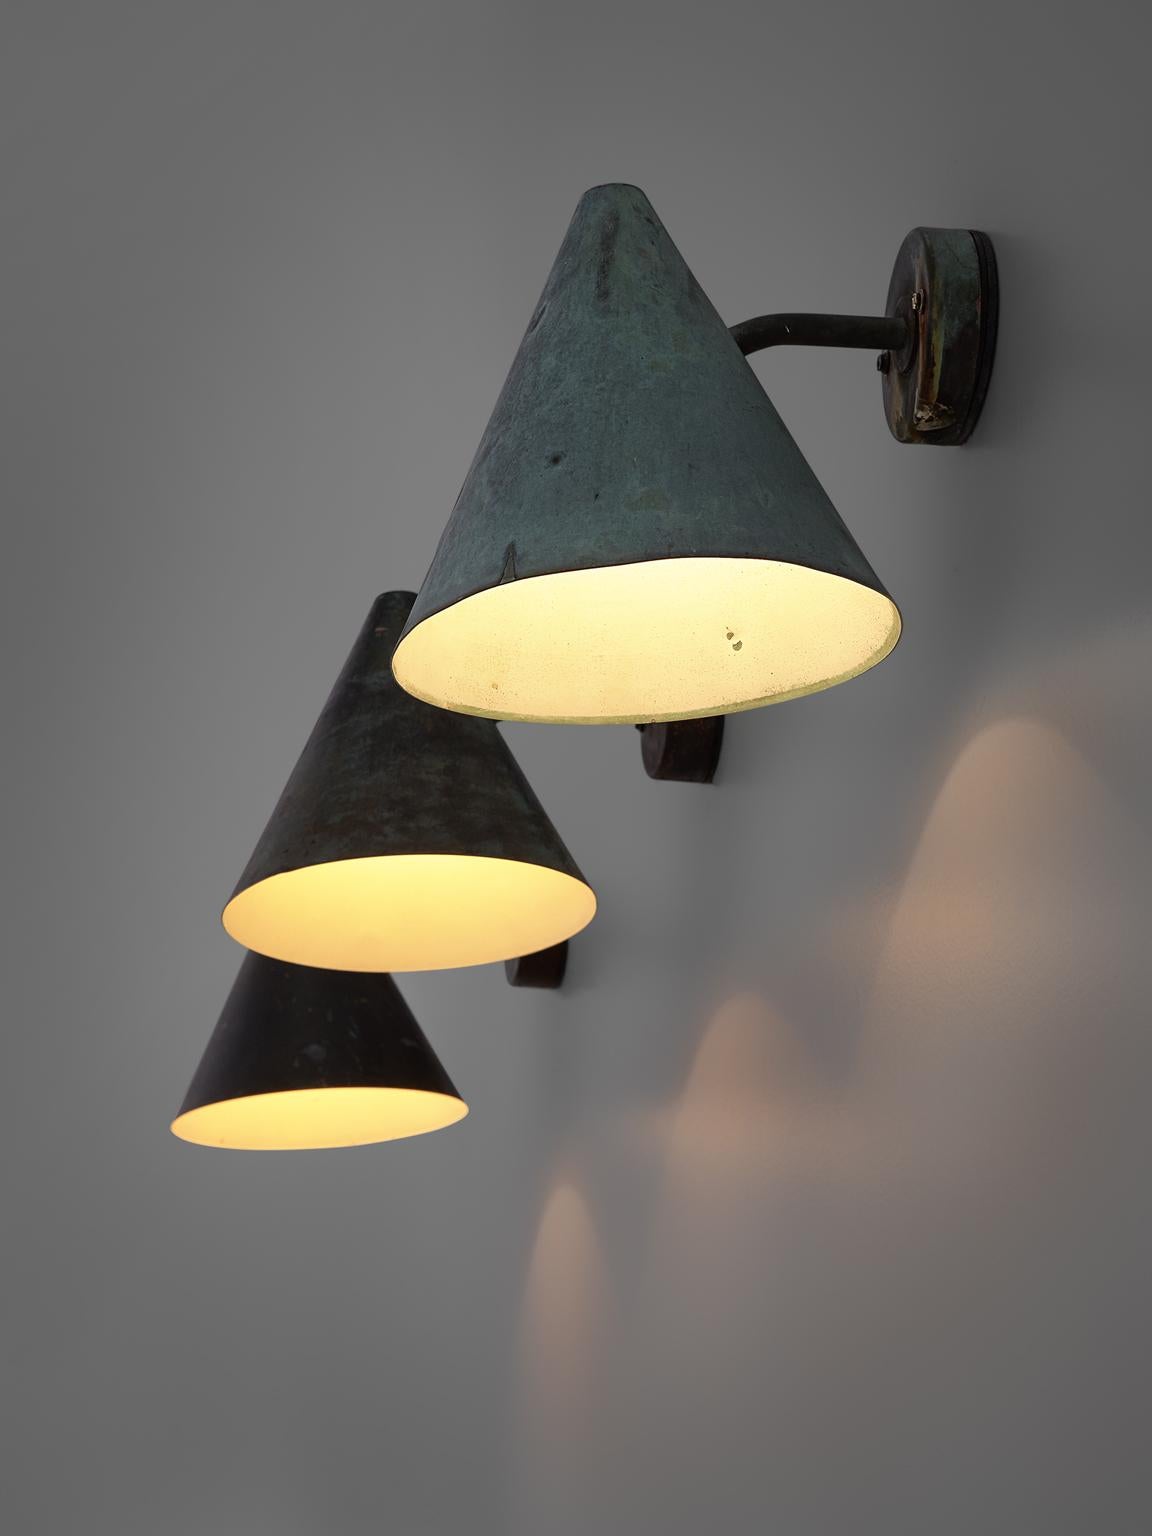 Hans-Agne Jakobsson for AB Markaryd, set of wall lights, copper, by Sweden, 1950s. 

Set of cone-shaped wall lights designed by Hans-Agne Jakobsson for AB Markaryd, in beautifully patinated copper with an off-white interior. The light this model